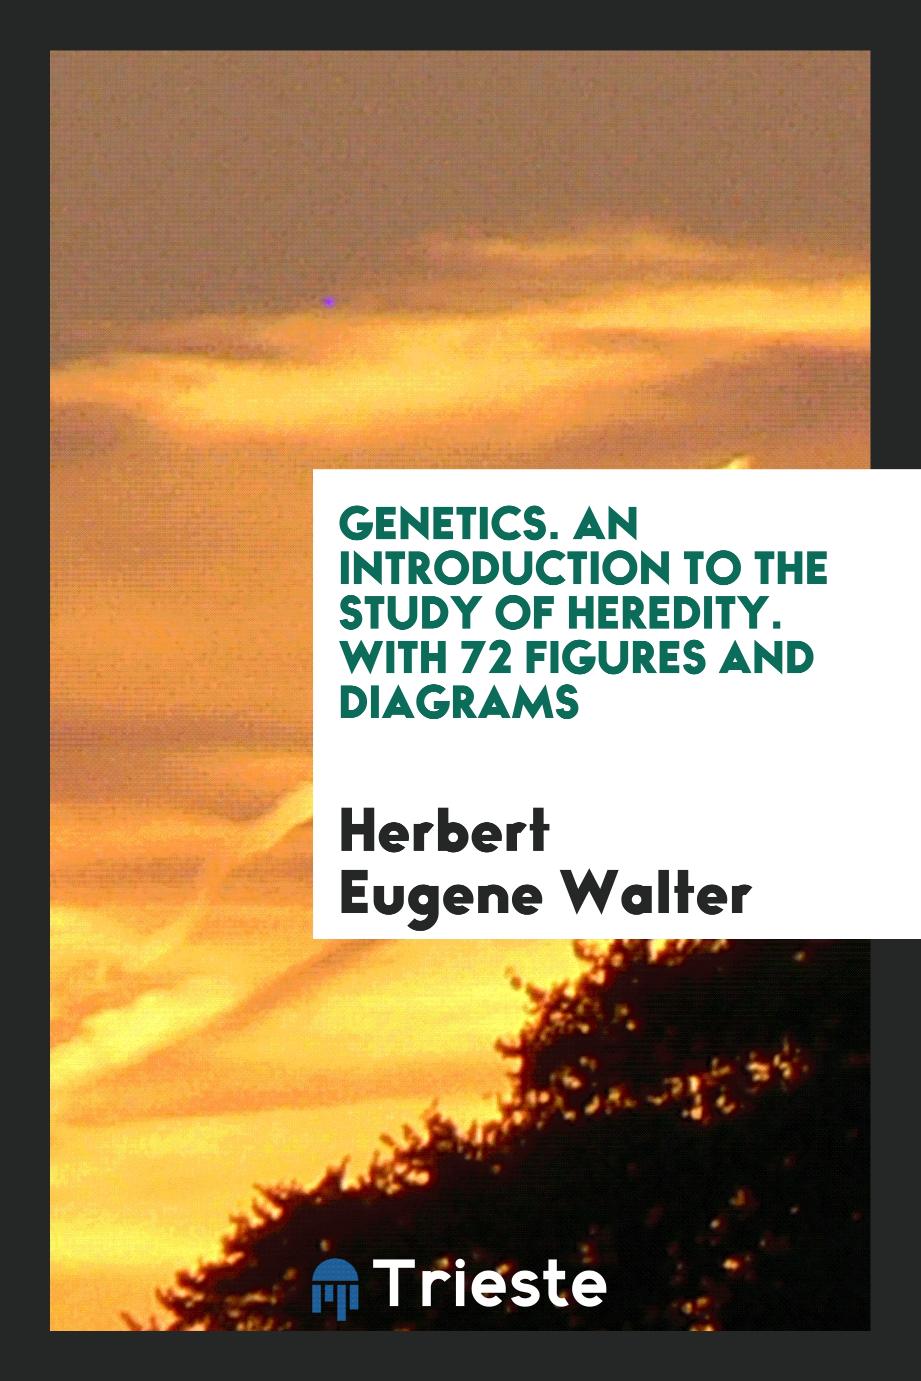 Genetics. An Introduction to the Study of Heredity. With 72 Figures and Diagrams